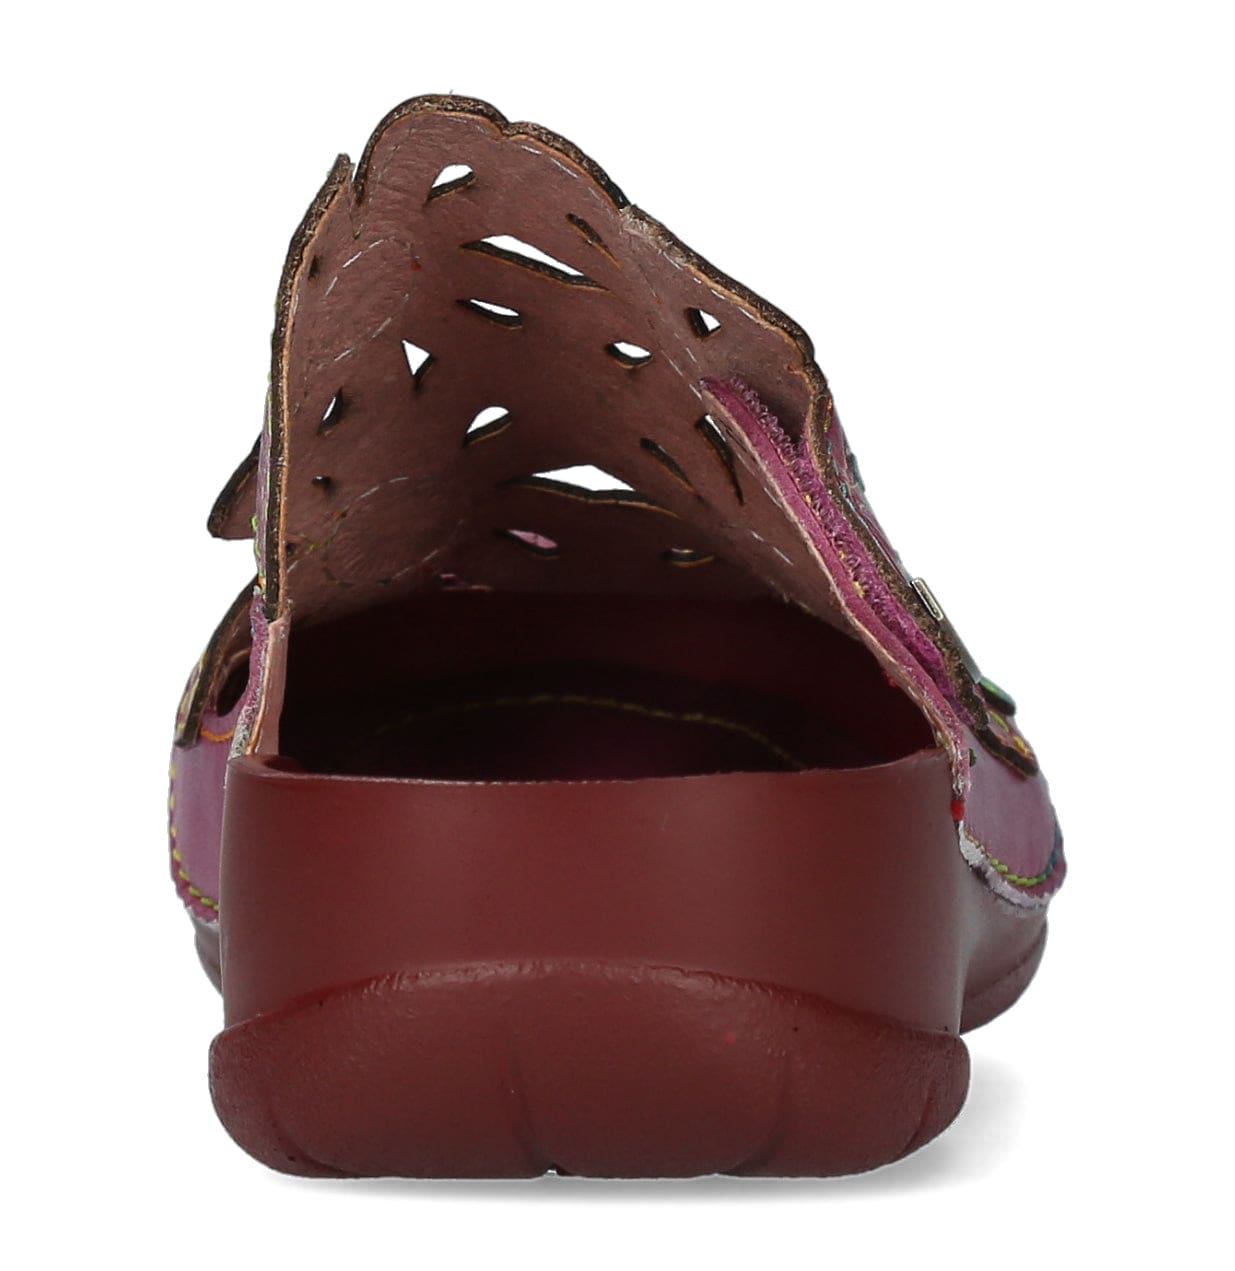 BECZIERSO 03 shoes - Mule